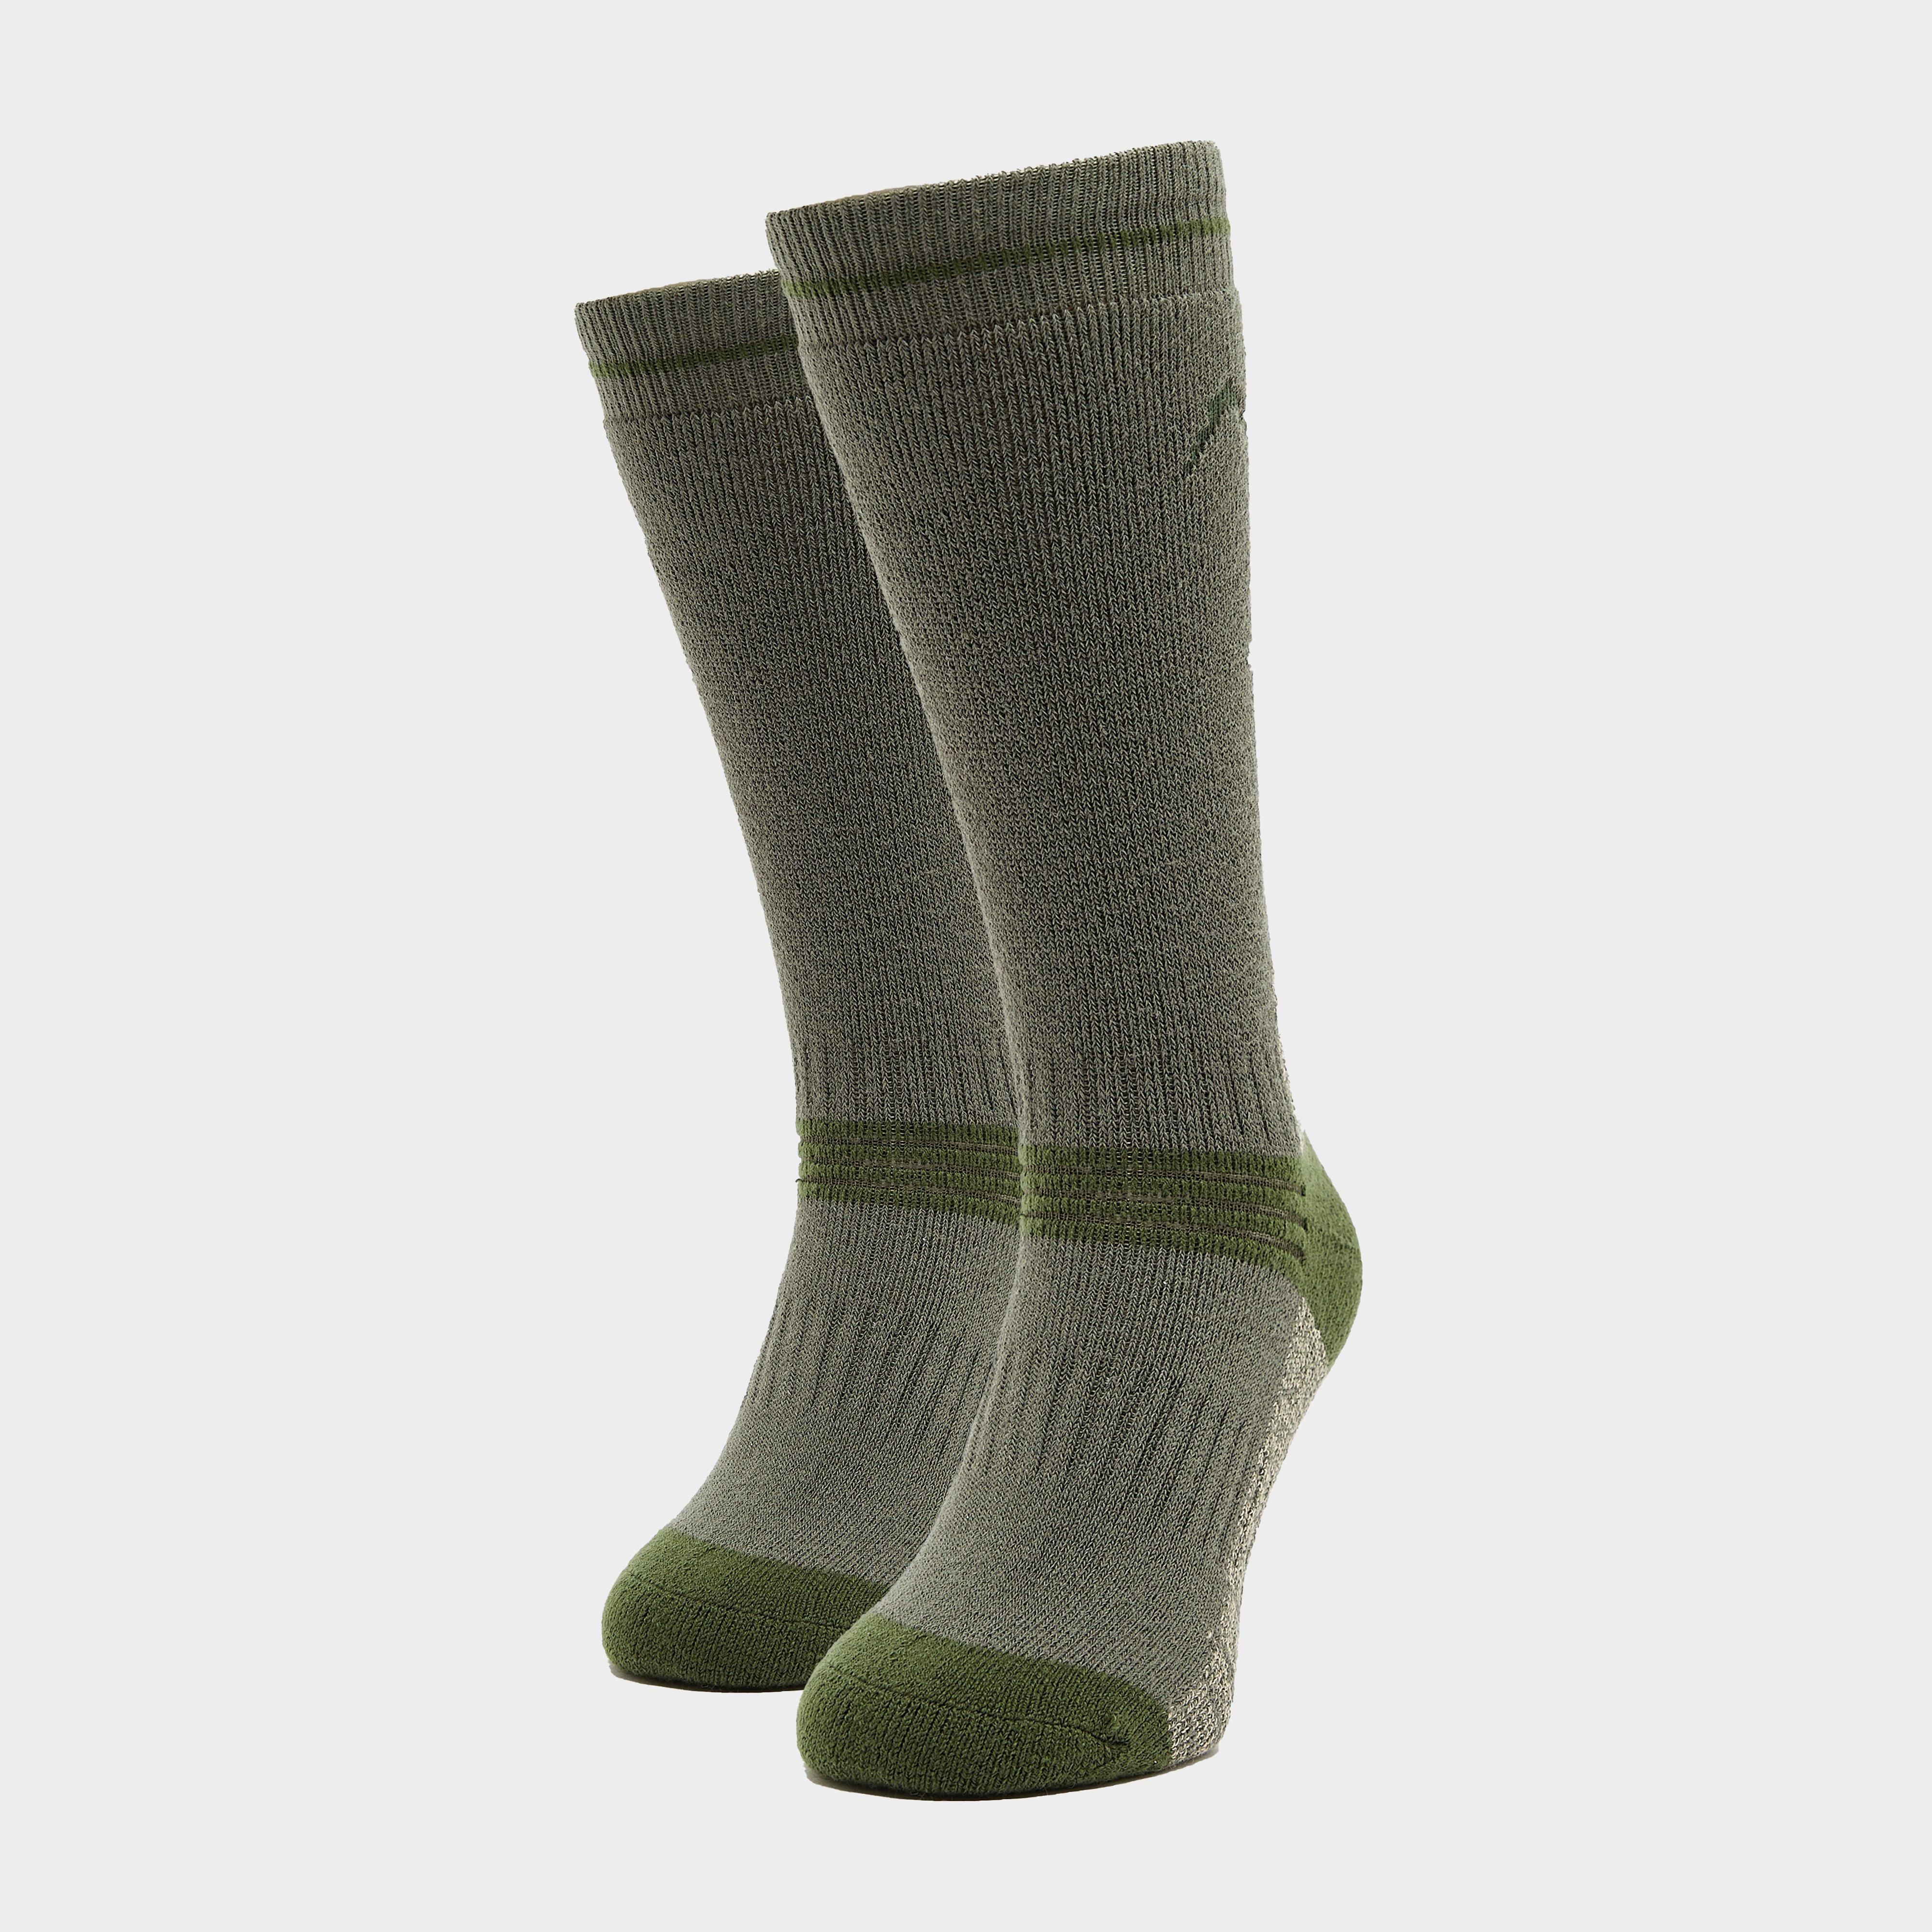 Peter Storm Heavyweight Outdoor Socks - 2 Pack - Green/sge  Green/sge